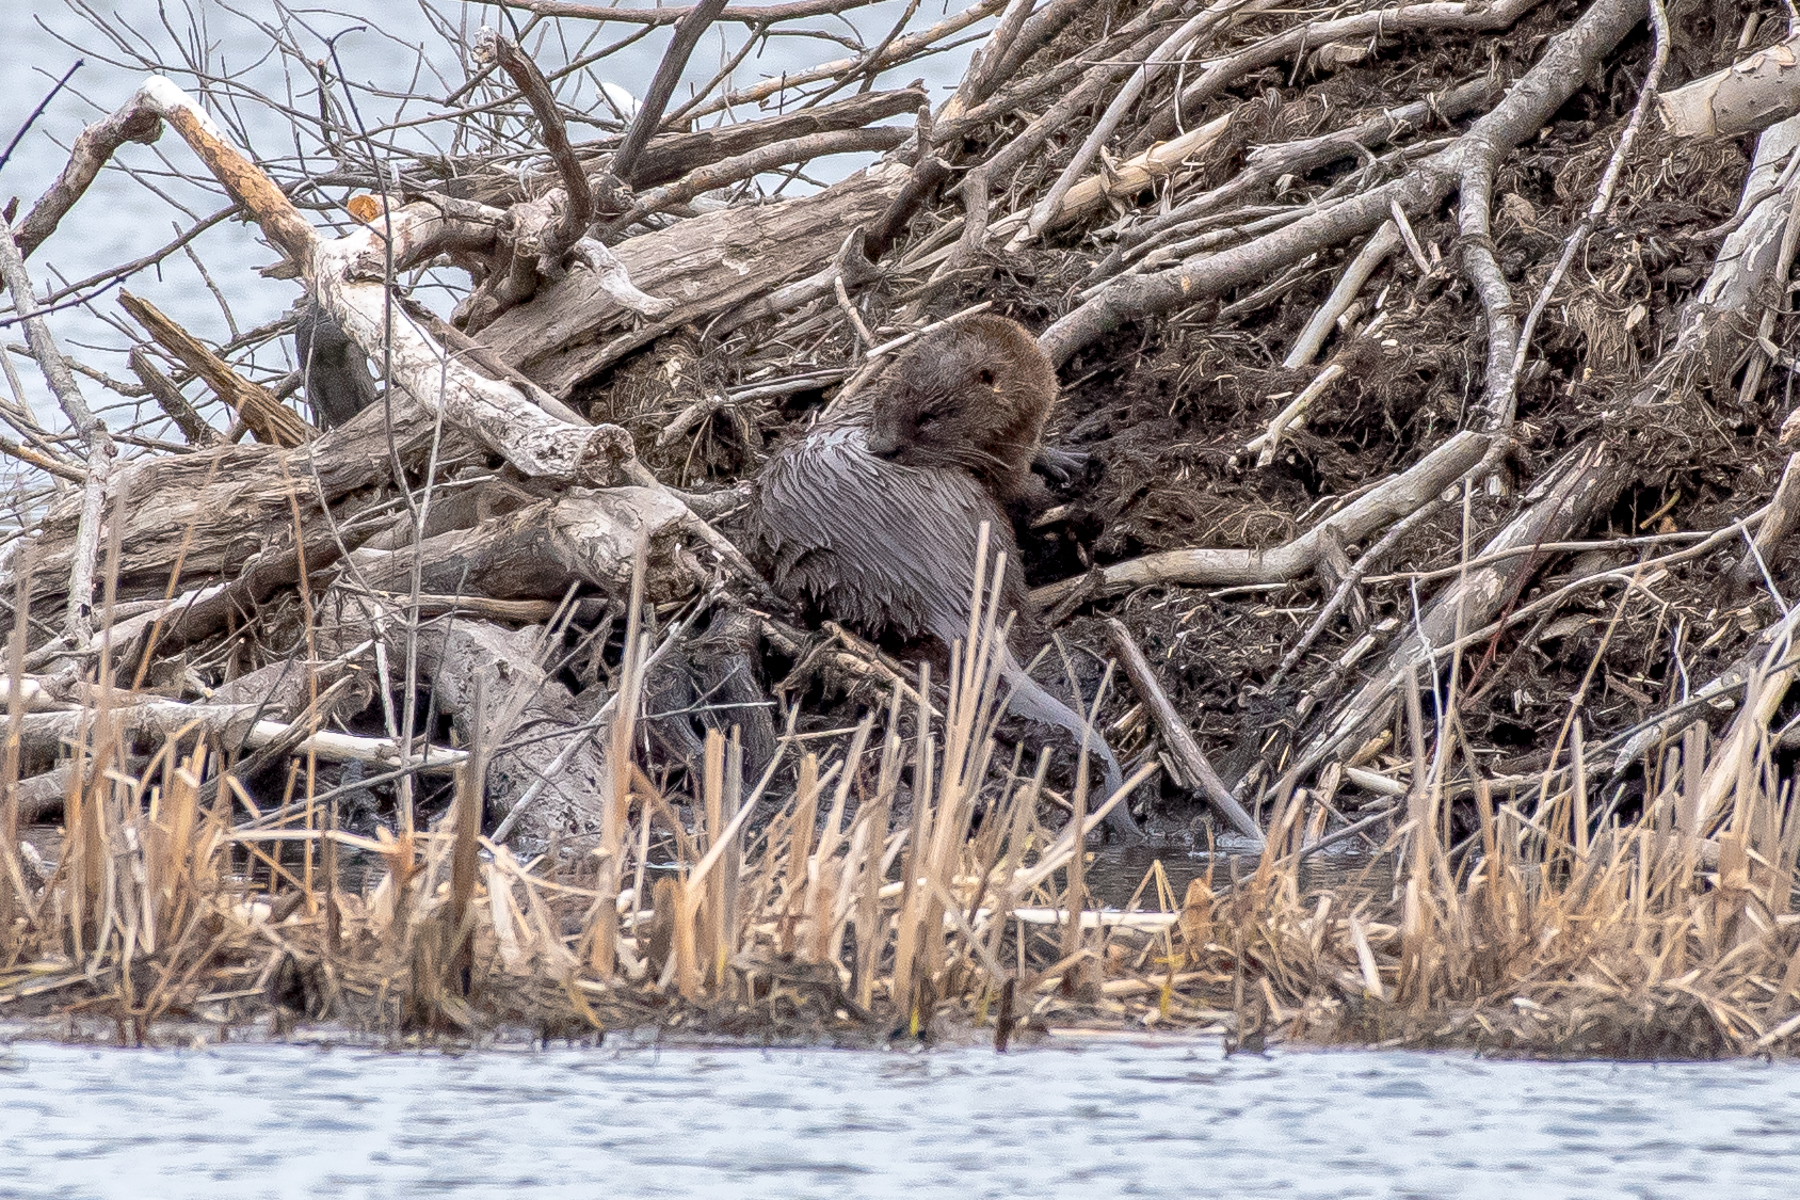   Here is the otter relaxing on a beaver lodge after feeding on fish all morning. &nbsp;I love these guys!! &nbsp; 3/23/16  